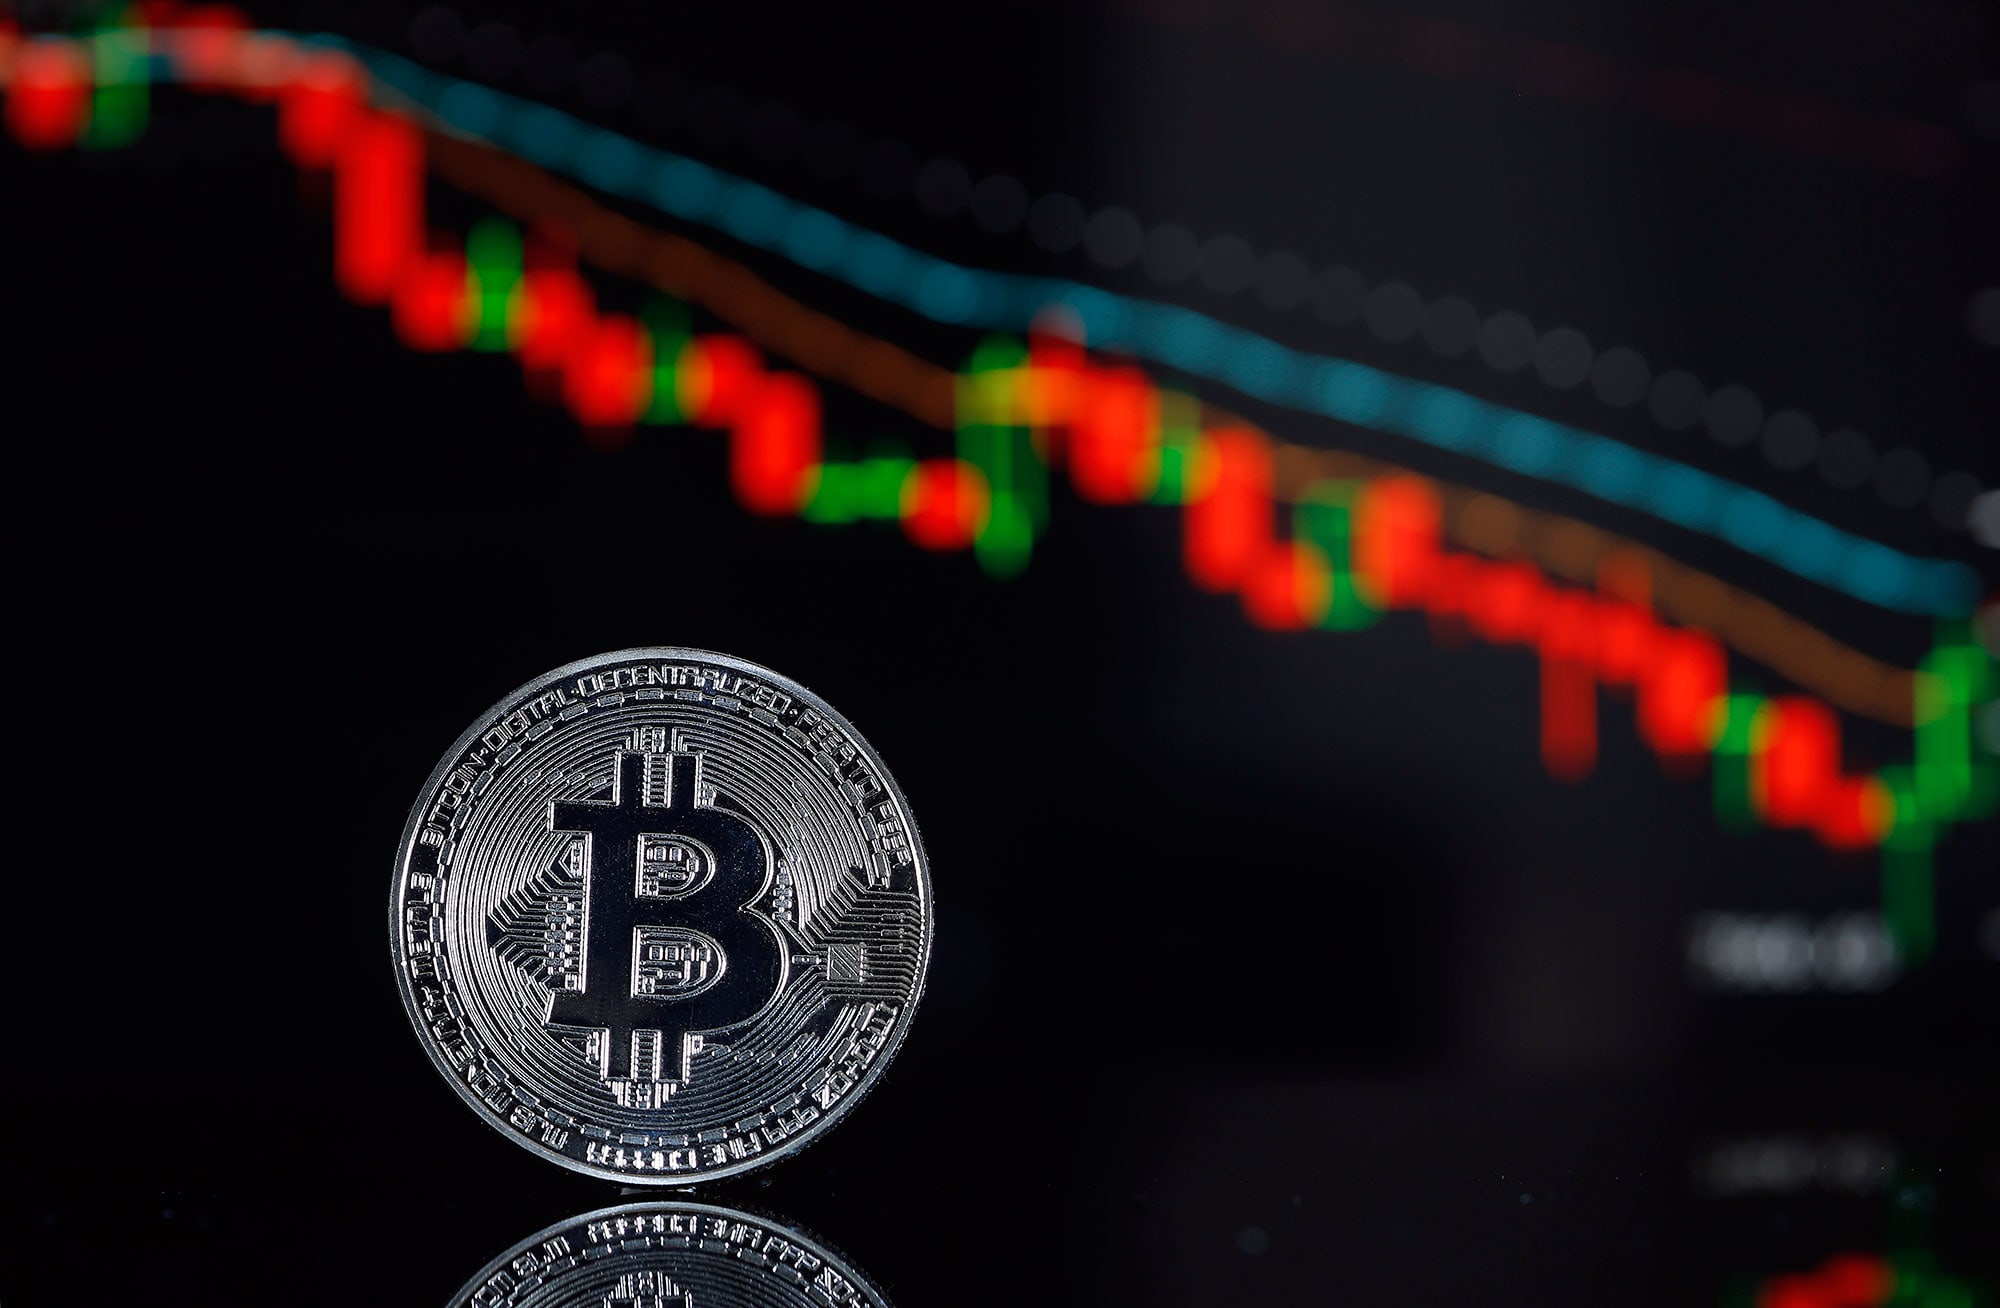 Cryptocurrency buying and selling quantity plunges as curiosity wanes following bitcoin value drop